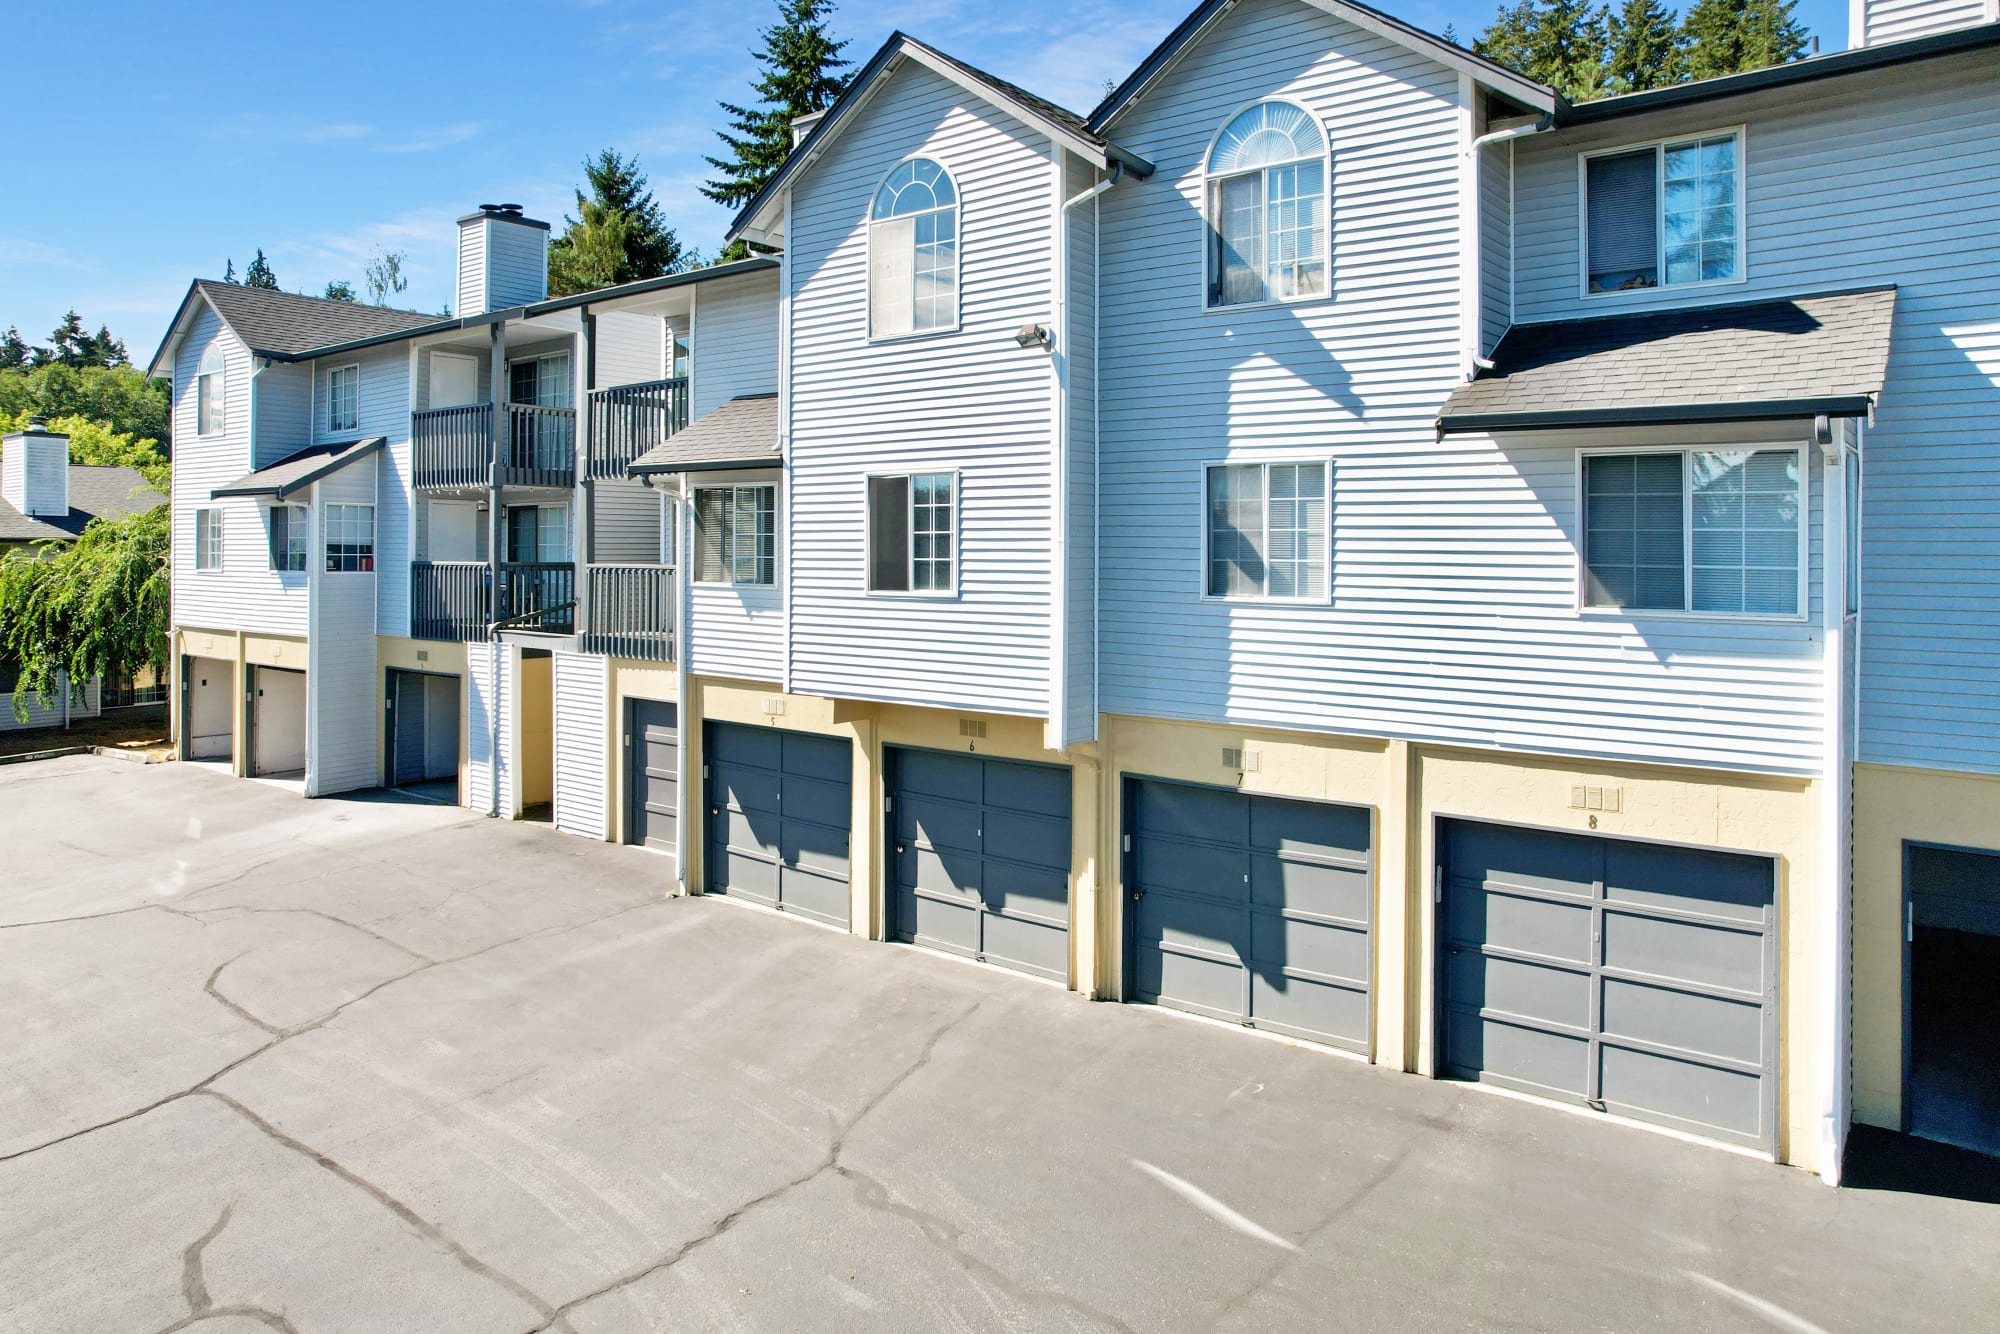 Building exterior and garages at Wellington Apartment Homes in Silverdale, Washington